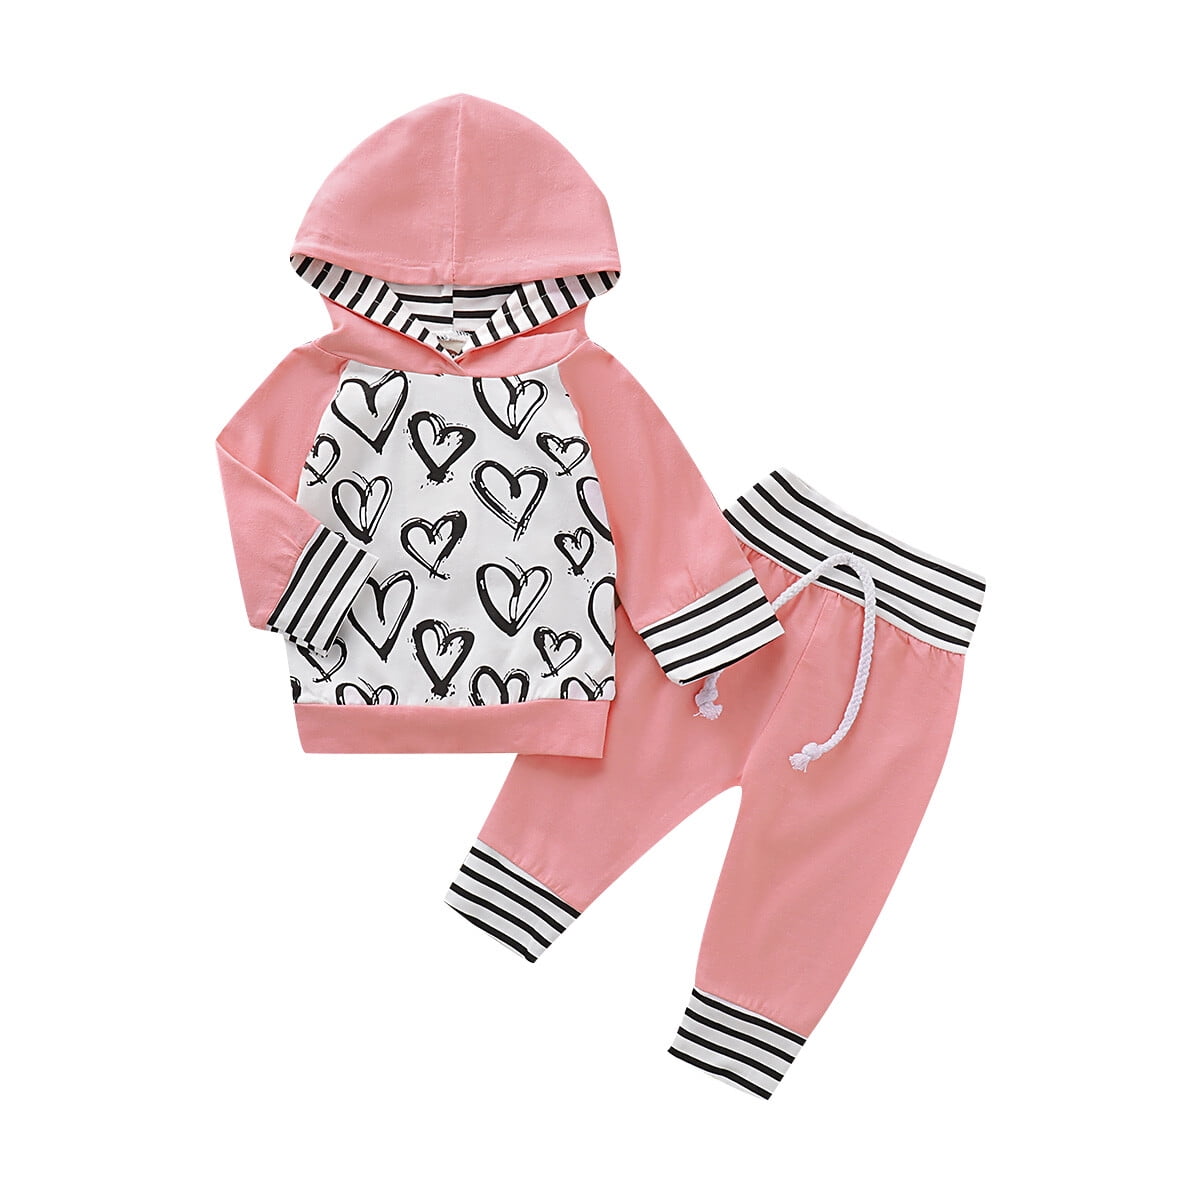 Baby Girls Long Sleeve Hoodie Sweatshirt Tops Pants Set 2Pc Toddler Hooded Shirt Fall Coming Home Outfit Clothes